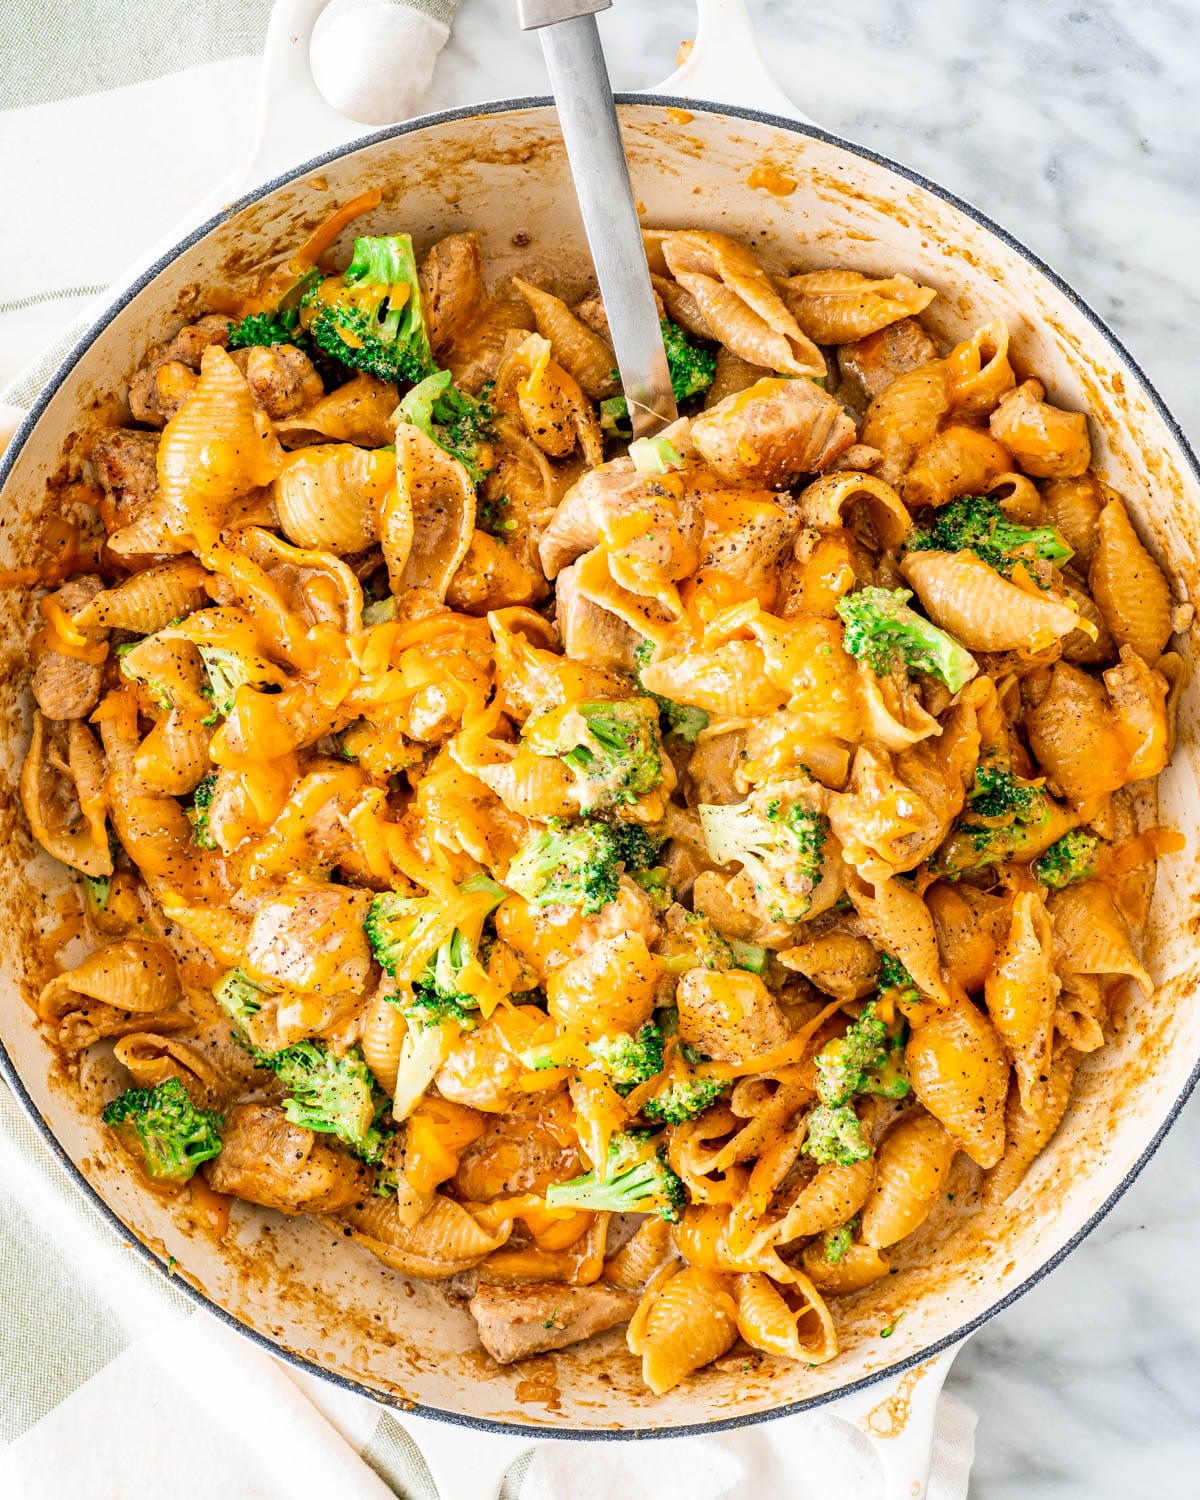 Crock pot mac and cheese with chicken and broccoli - dopcajordan